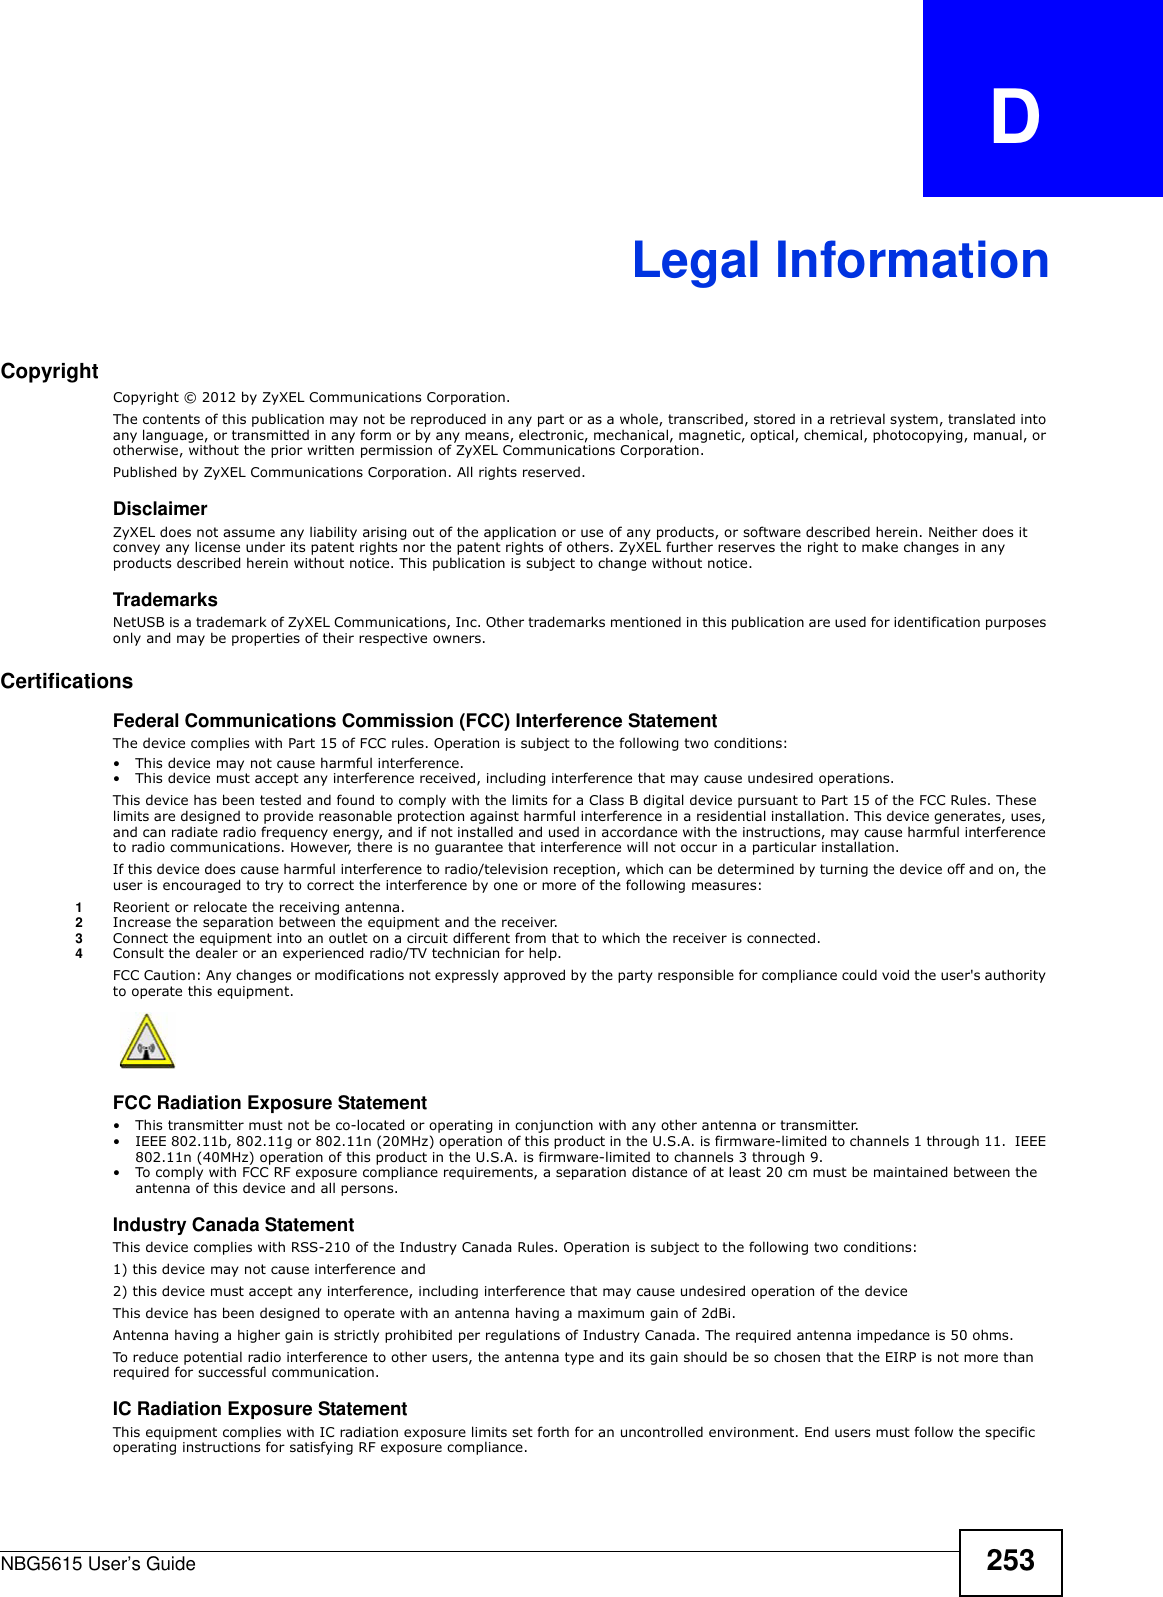 NBG5615 User’s Guide 253APPENDIX   DLegal InformationCopyrightCopyright © 2012 by ZyXEL Communications Corporation.The contents of this publication may not be reproduced in any part or as a whole, transcribed, stored in a retrieval system, translated into any language, or transmitted in any form or by any means, electronic, mechanical, magnetic, optical, chemical, photocopying, manual, or otherwise, without the prior written permission of ZyXEL Communications Corporation.Published by ZyXEL Communications Corporation. All rights reserved.DisclaimerZyXEL does not assume any liability arising out of the application or use of any products, or software described herein. Neither does it convey any license under its patent rights nor the patent rights of others. ZyXEL further reserves the right to make changes in any products described herein without notice. This publication is subject to change without notice.TrademarksNetUSB is a trademark of ZyXEL Communications, Inc. Other trademarks mentioned in this publication are used for identification purposes only and may be properties of their respective owners.Certifications  Federal Communications Commission (FCC) Interference Statement The device complies with Part 15 of FCC rules. Operation is subject to the following two conditions:• This device may not cause harmful interference.• This device must accept any interference received, including interference that may cause undesired operations.This device has been tested and found to comply with the limits for a Class B digital device pursuant to Part 15 of the FCC Rules. These limits are designed to provide reasonable protection against harmful interference in a residential installation. This device generates, uses, and can radiate radio frequency energy, and if not installed and used in accordance with the instructions, may cause harmful interference to radio communications. However, there is no guarantee that interference will not occur in a particular installation.If this device does cause harmful interference to radio/television reception, which can be determined by turning the device off and on, the user is encouraged to try to correct the interference by one or more of the following measures:1Reorient or relocate the receiving antenna.2Increase the separation between the equipment and the receiver.3Connect the equipment into an outlet on a circuit different from that to which the receiver is connected.4Consult the dealer or an experienced radio/TV technician for help.FCC Caution: Any changes or modifications not expressly approved by the party responsible for compliance could void the user&apos;s authority to operate this equipment.FCC Radiation Exposure Statement • This transmitter must not be co-located or operating in conjunction with any other antenna or transmitter. • IEEE 802.11b, 802.11g or 802.11n (20MHz) operation of this product in the U.S.A. is firmware-limited to channels 1 through 11.  IEEE 802.11n (40MHz) operation of this product in the U.S.A. is firmware-limited to channels 3 through 9.• To comply with FCC RF exposure compliance requirements, a separation distance of at least 20 cm must be maintained between the antenna of this device and all persons. Industry Canada StatementThis device complies with RSS-210 of the Industry Canada Rules. Operation is subject to the following two conditions:1) this device may not cause interference and2) this device must accept any interference, including interference that may cause undesired operation of the deviceThis device has been designed to operate with an antenna having a maximum gain of 2dBi.Antenna having a higher gain is strictly prohibited per regulations of Industry Canada. The required antenna impedance is 50 ohms.To reduce potential radio interference to other users, the antenna type and its gain should be so chosen that the EIRP is not more than required for successful communication.IC Radiation Exposure Statement This equipment complies with IC radiation exposure limits set forth for an uncontrolled environment. End users must follow the specific operating instructions for satisfying RF exposure compliance.